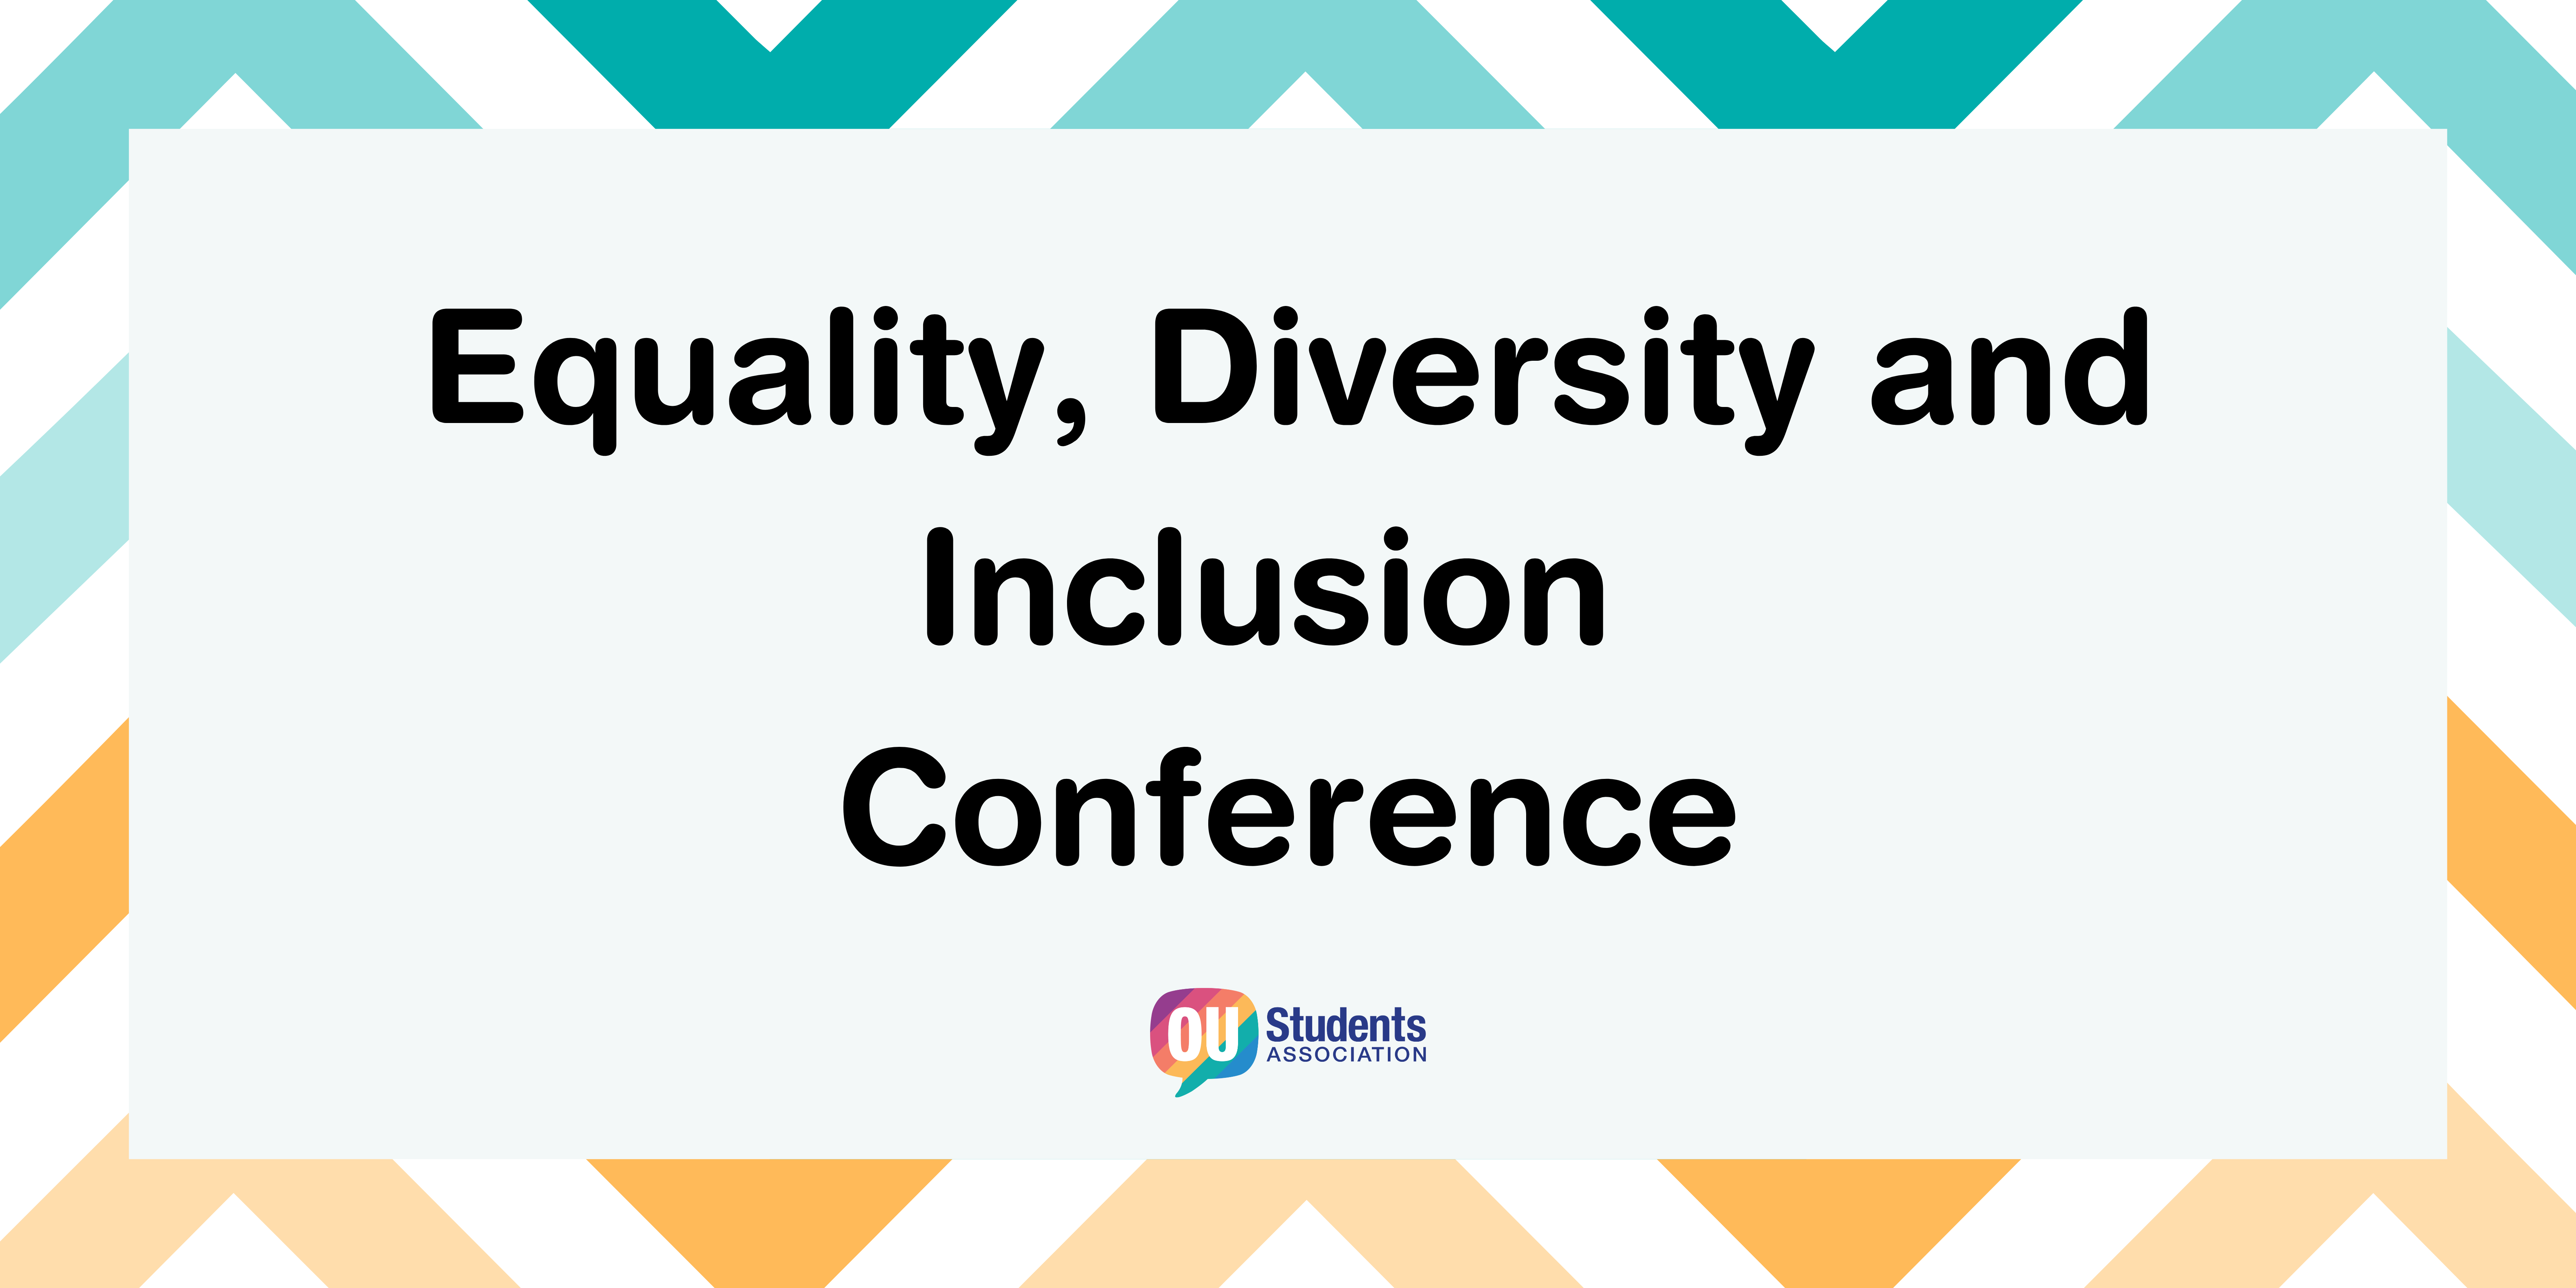 Equality, Diversity and Inclusion conference header with chevron pattern background in blue and yellow ombre.